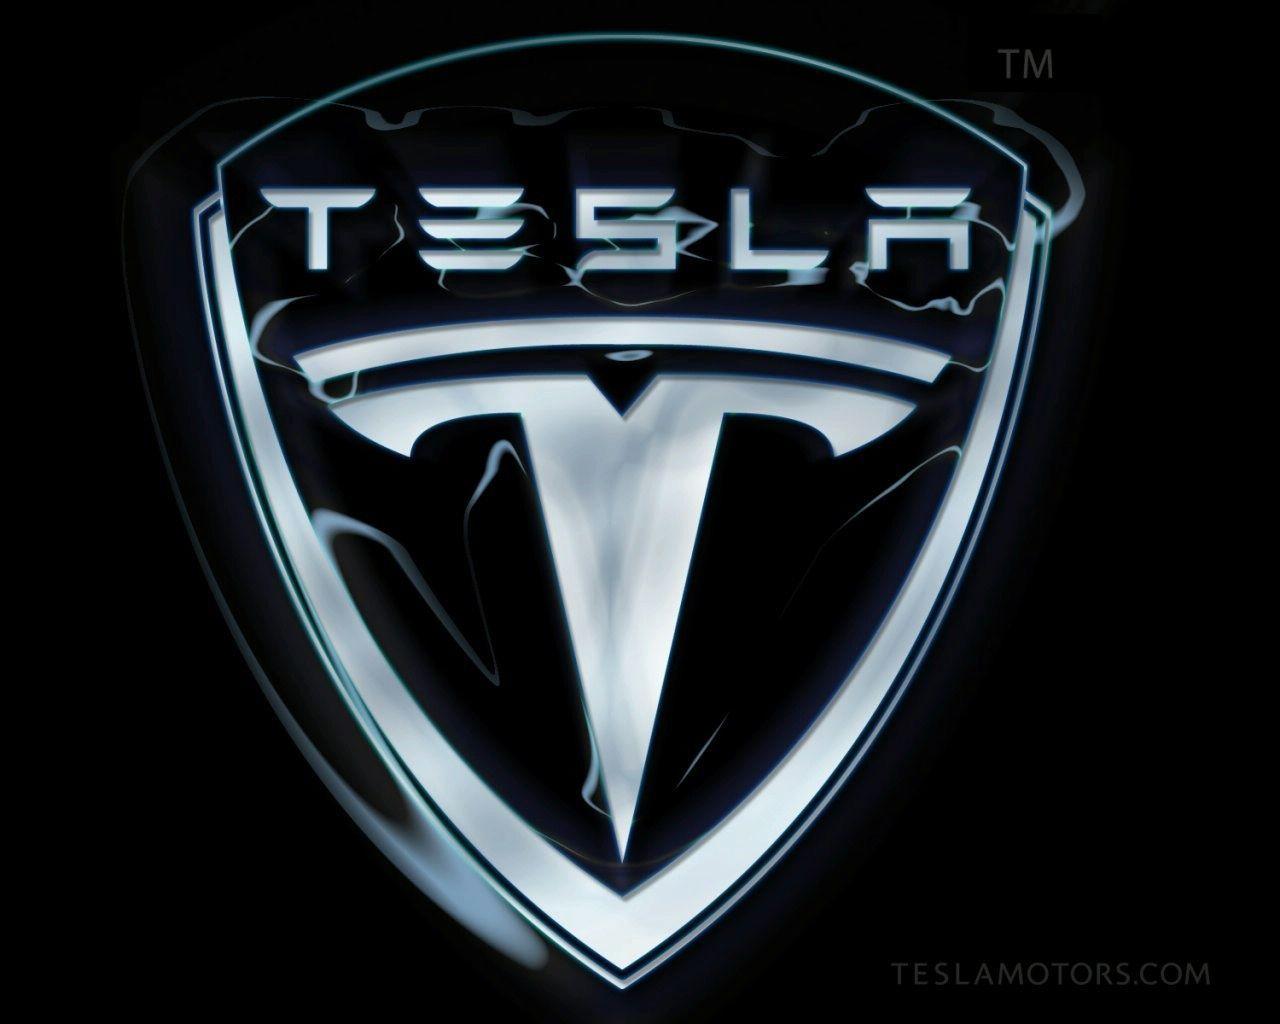 2017 Tesla Logo - Things to Consider for the First Tesla in India